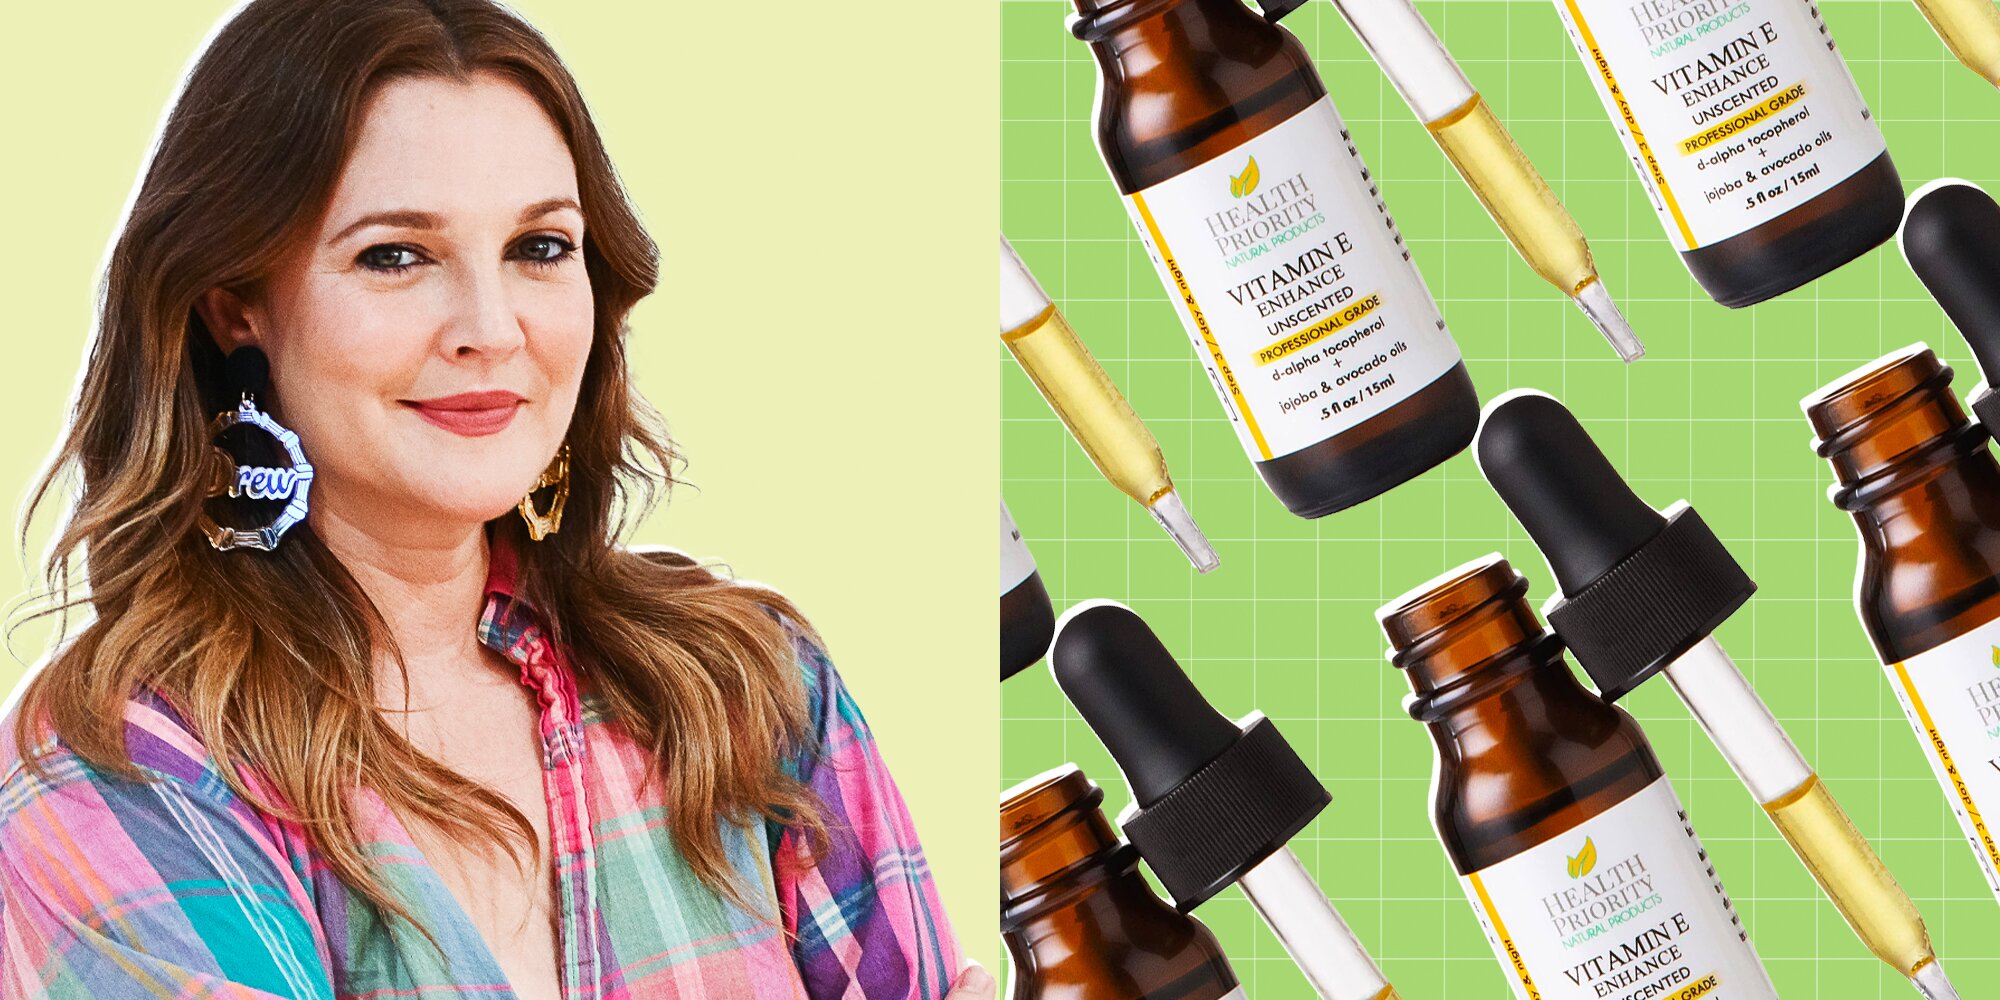 Drew Barrymore 'Douses' Herself in This $20 Vitamin E Oil for Hydration and Nourishment